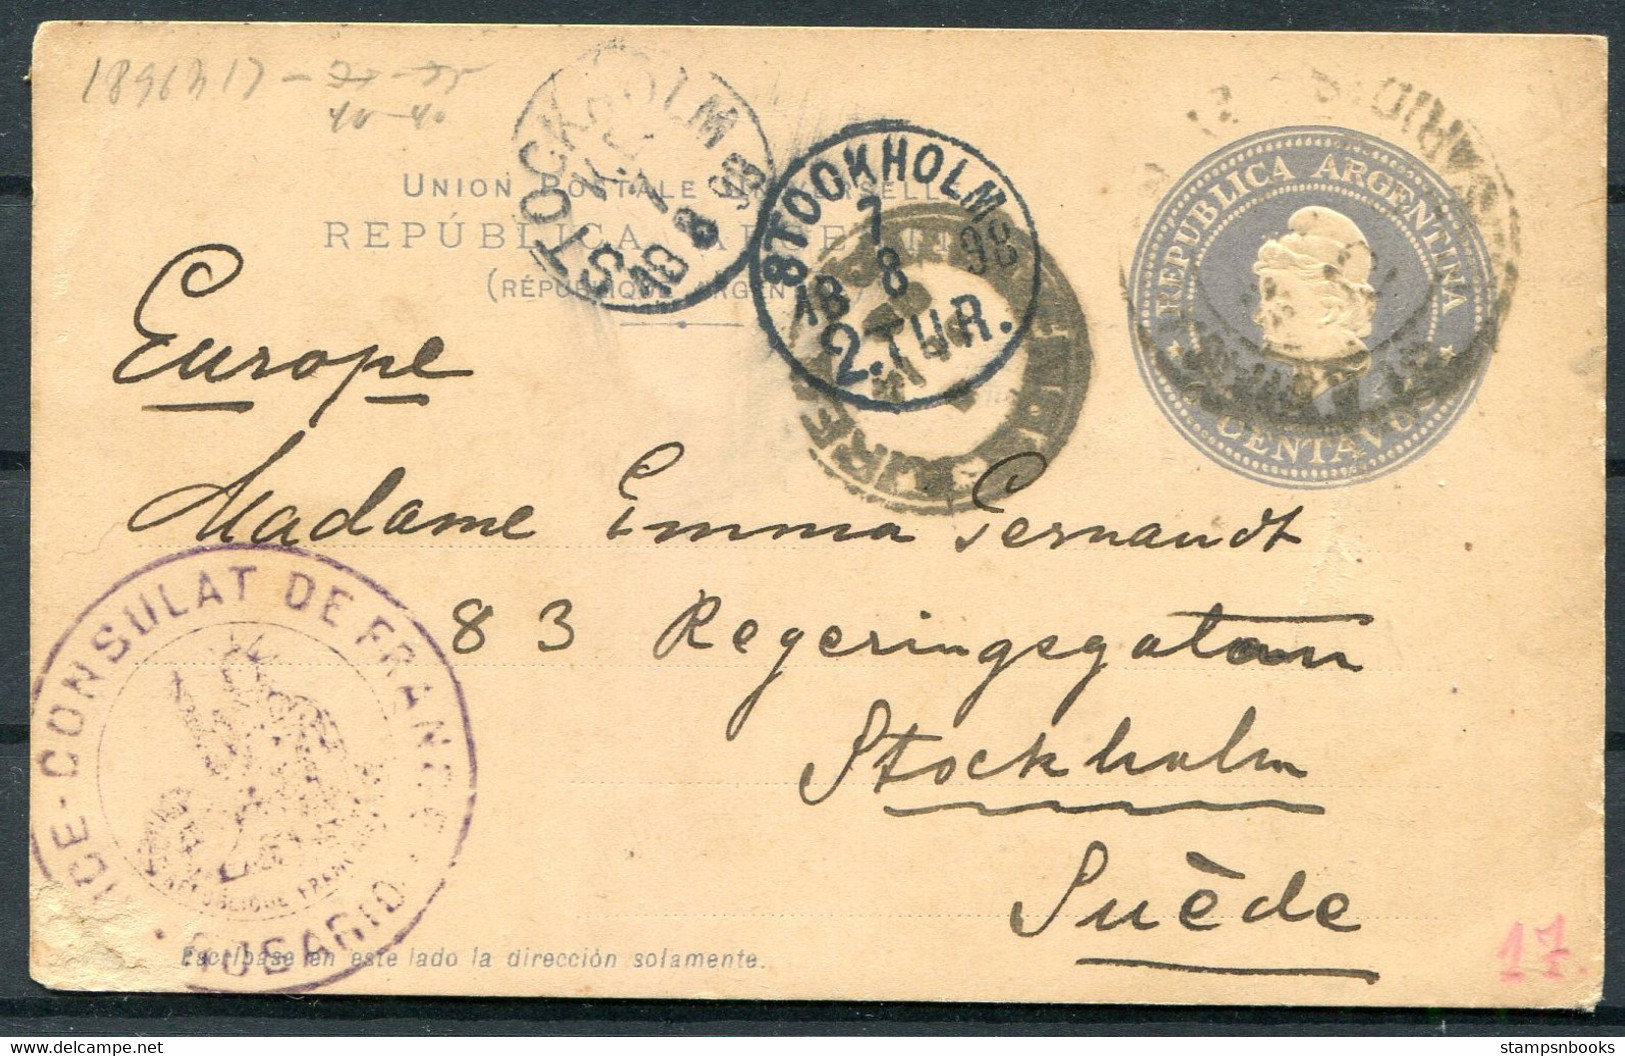 1898 Argentina Stationery Postcard "Consulat De France" Rosario - Stockholm Sweden - Covers & Documents